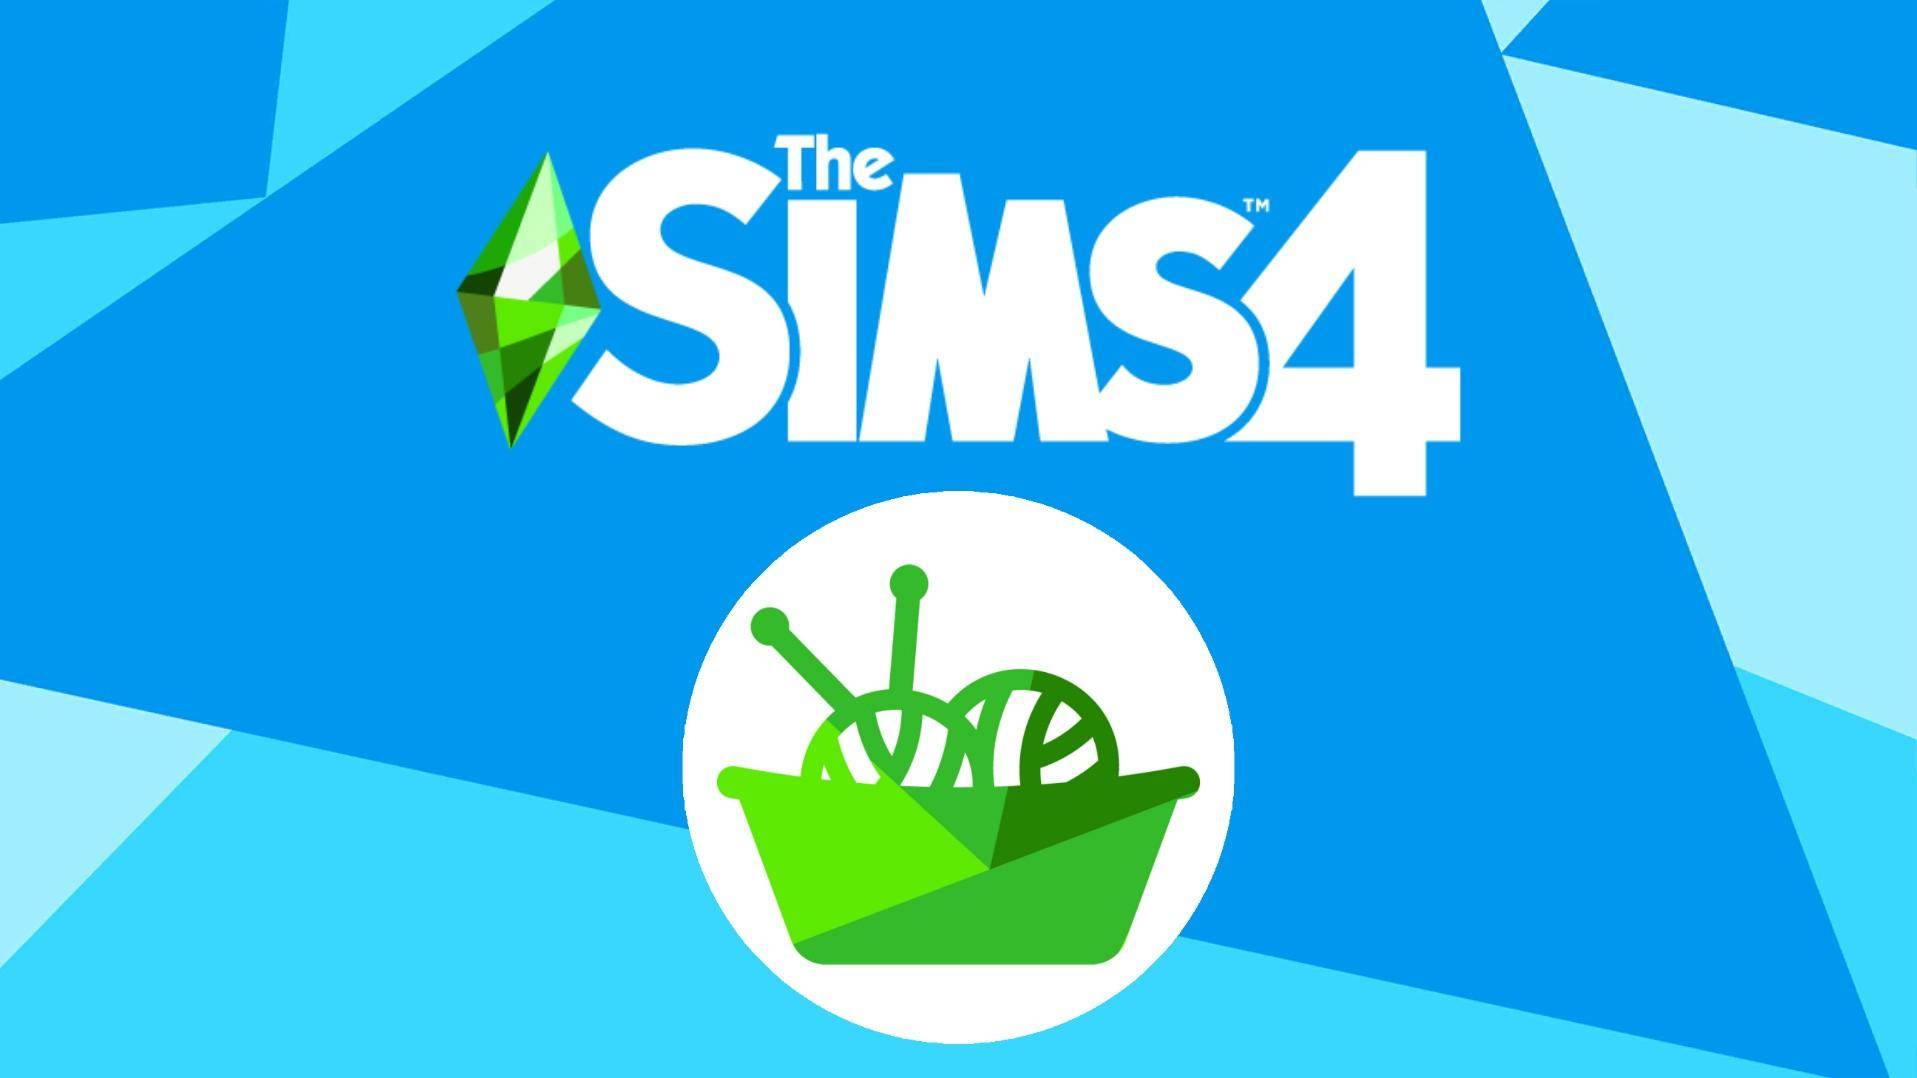 The Sims 4 reveals the name and the icon of its new pack